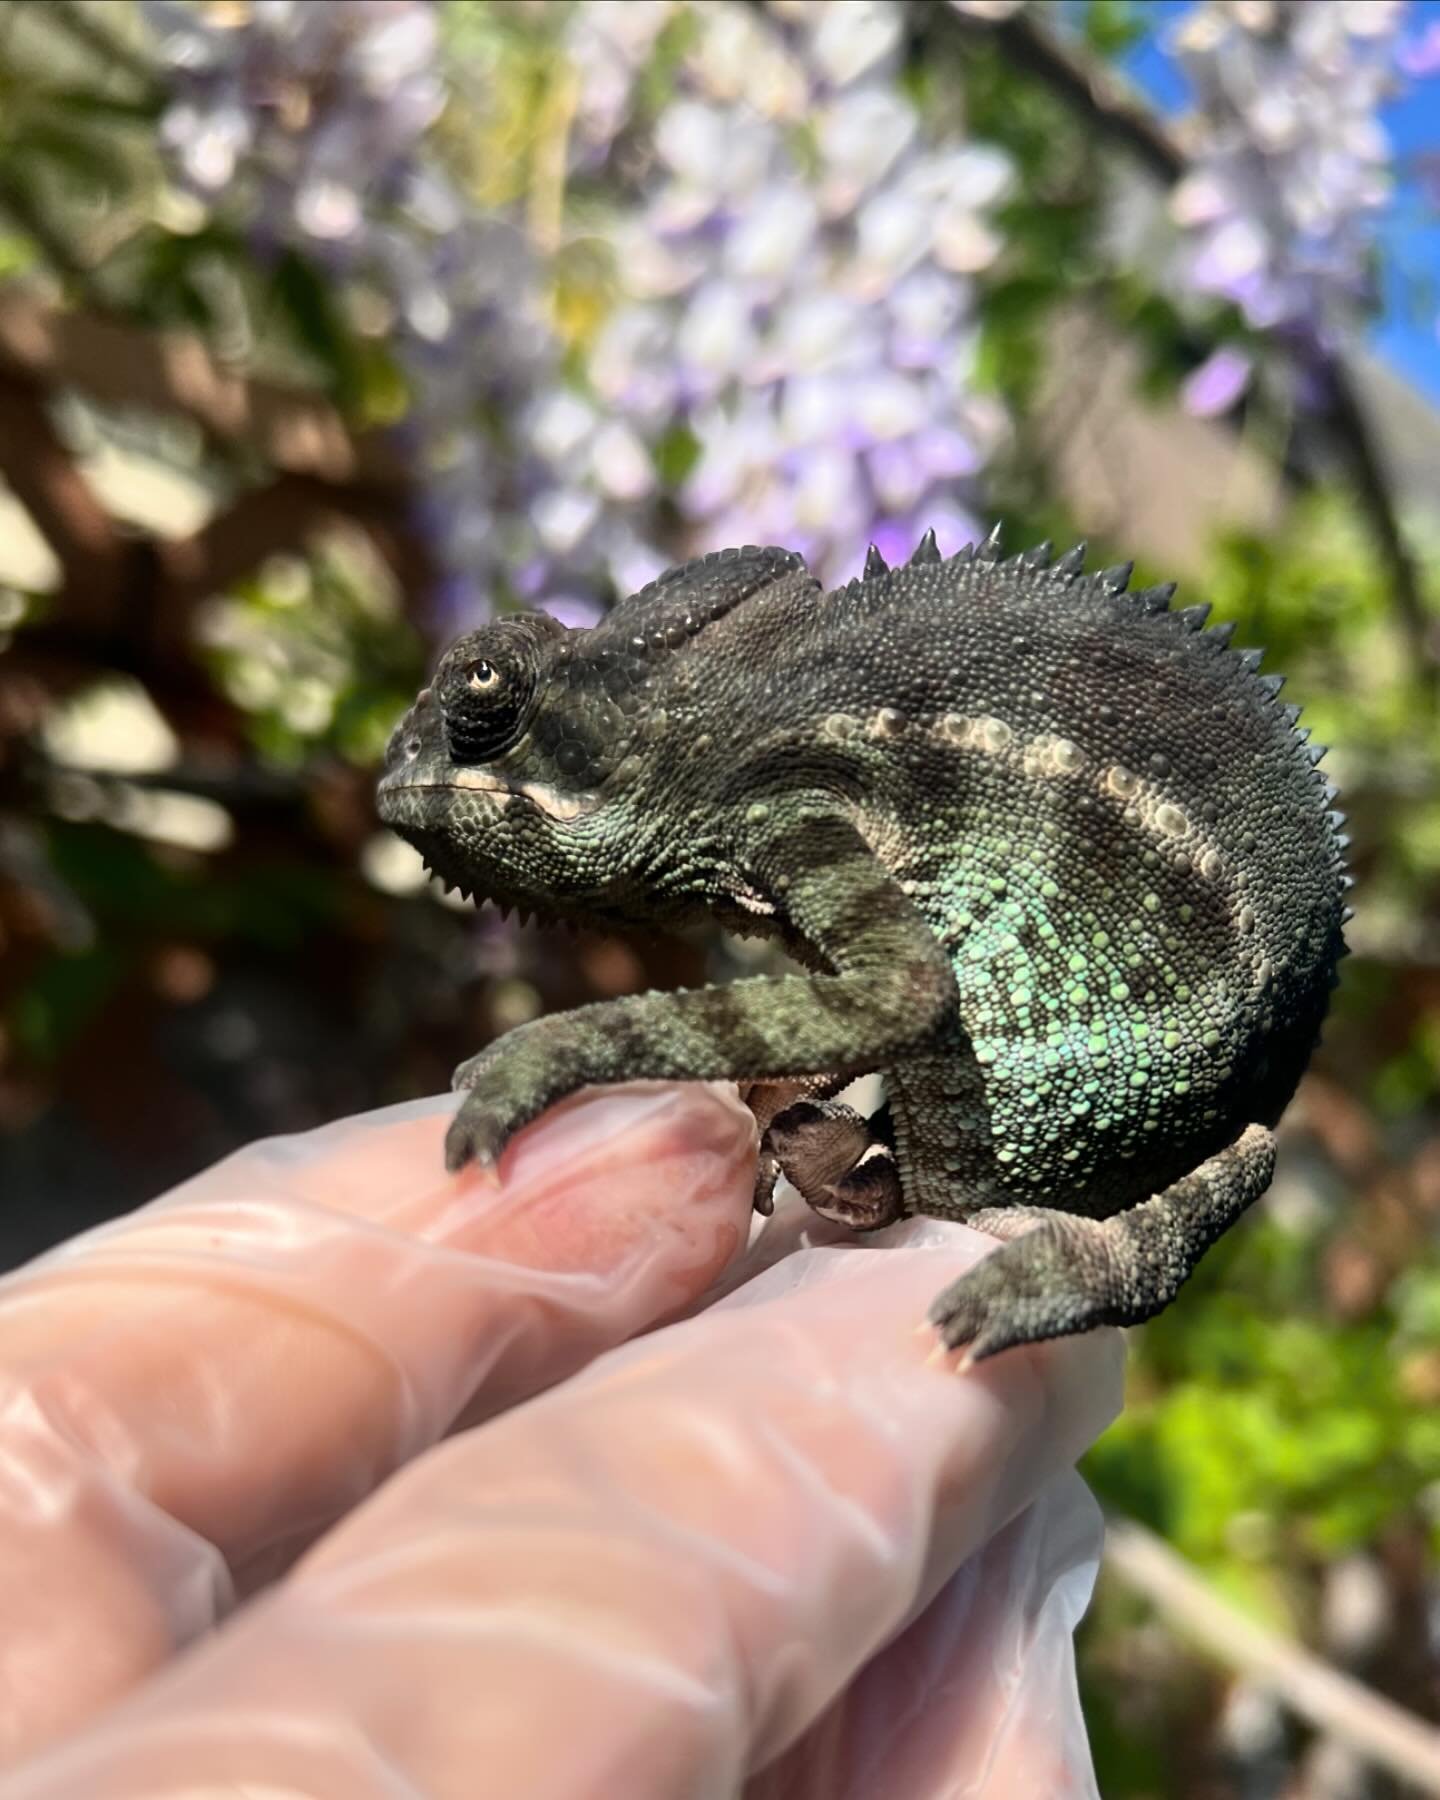 And the last official Giant Spiney Panther Chameleon hybrid that will ever be available from this project don&rsquo;t miss out they are growing like weeds